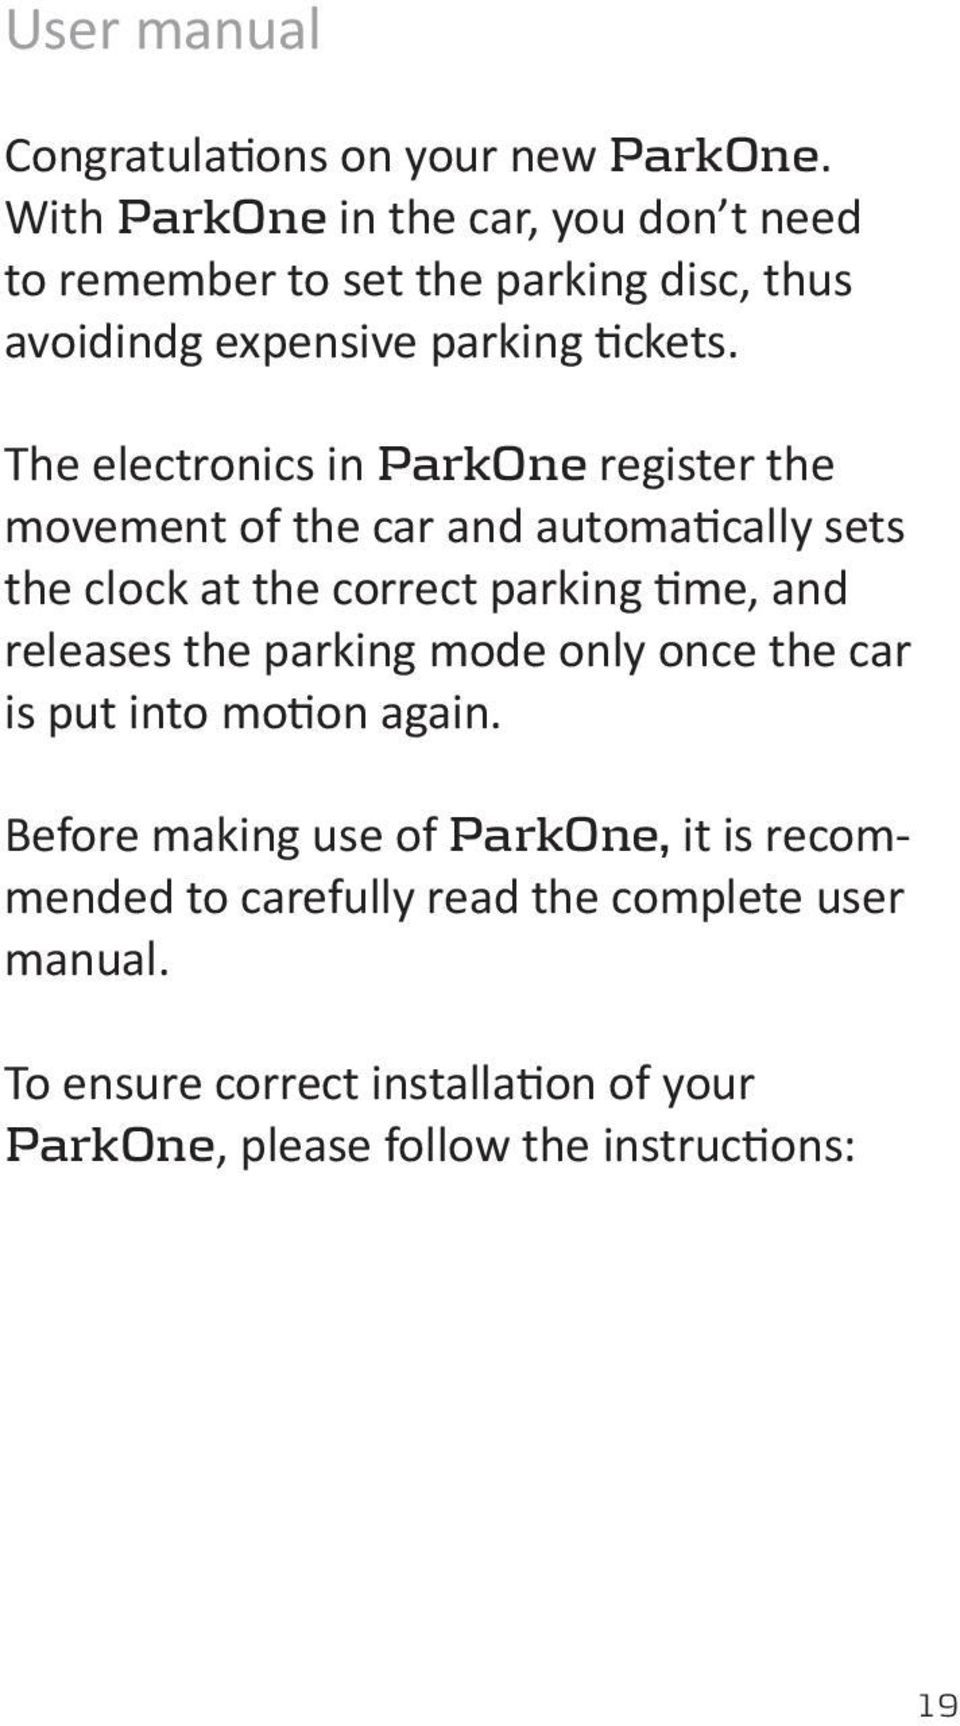 The electronics in ParkOne register the movement of the car and automatically sets the clock at the correct parking time, and releases